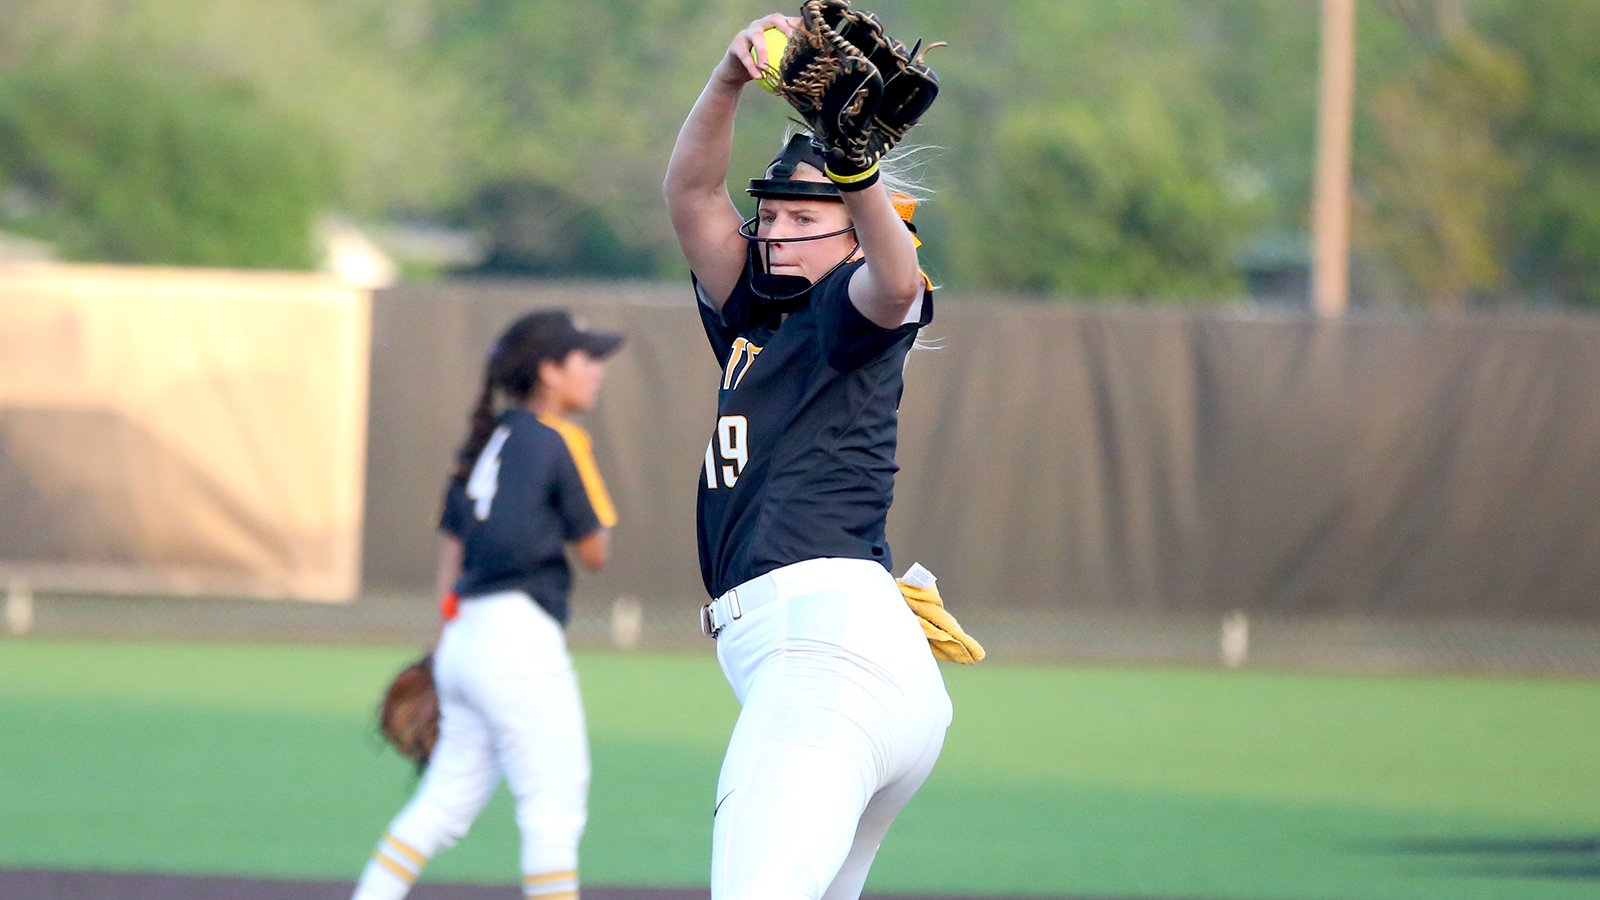 Softball Moves into Third in SCAC with Doubleheader Sweep of Dallas